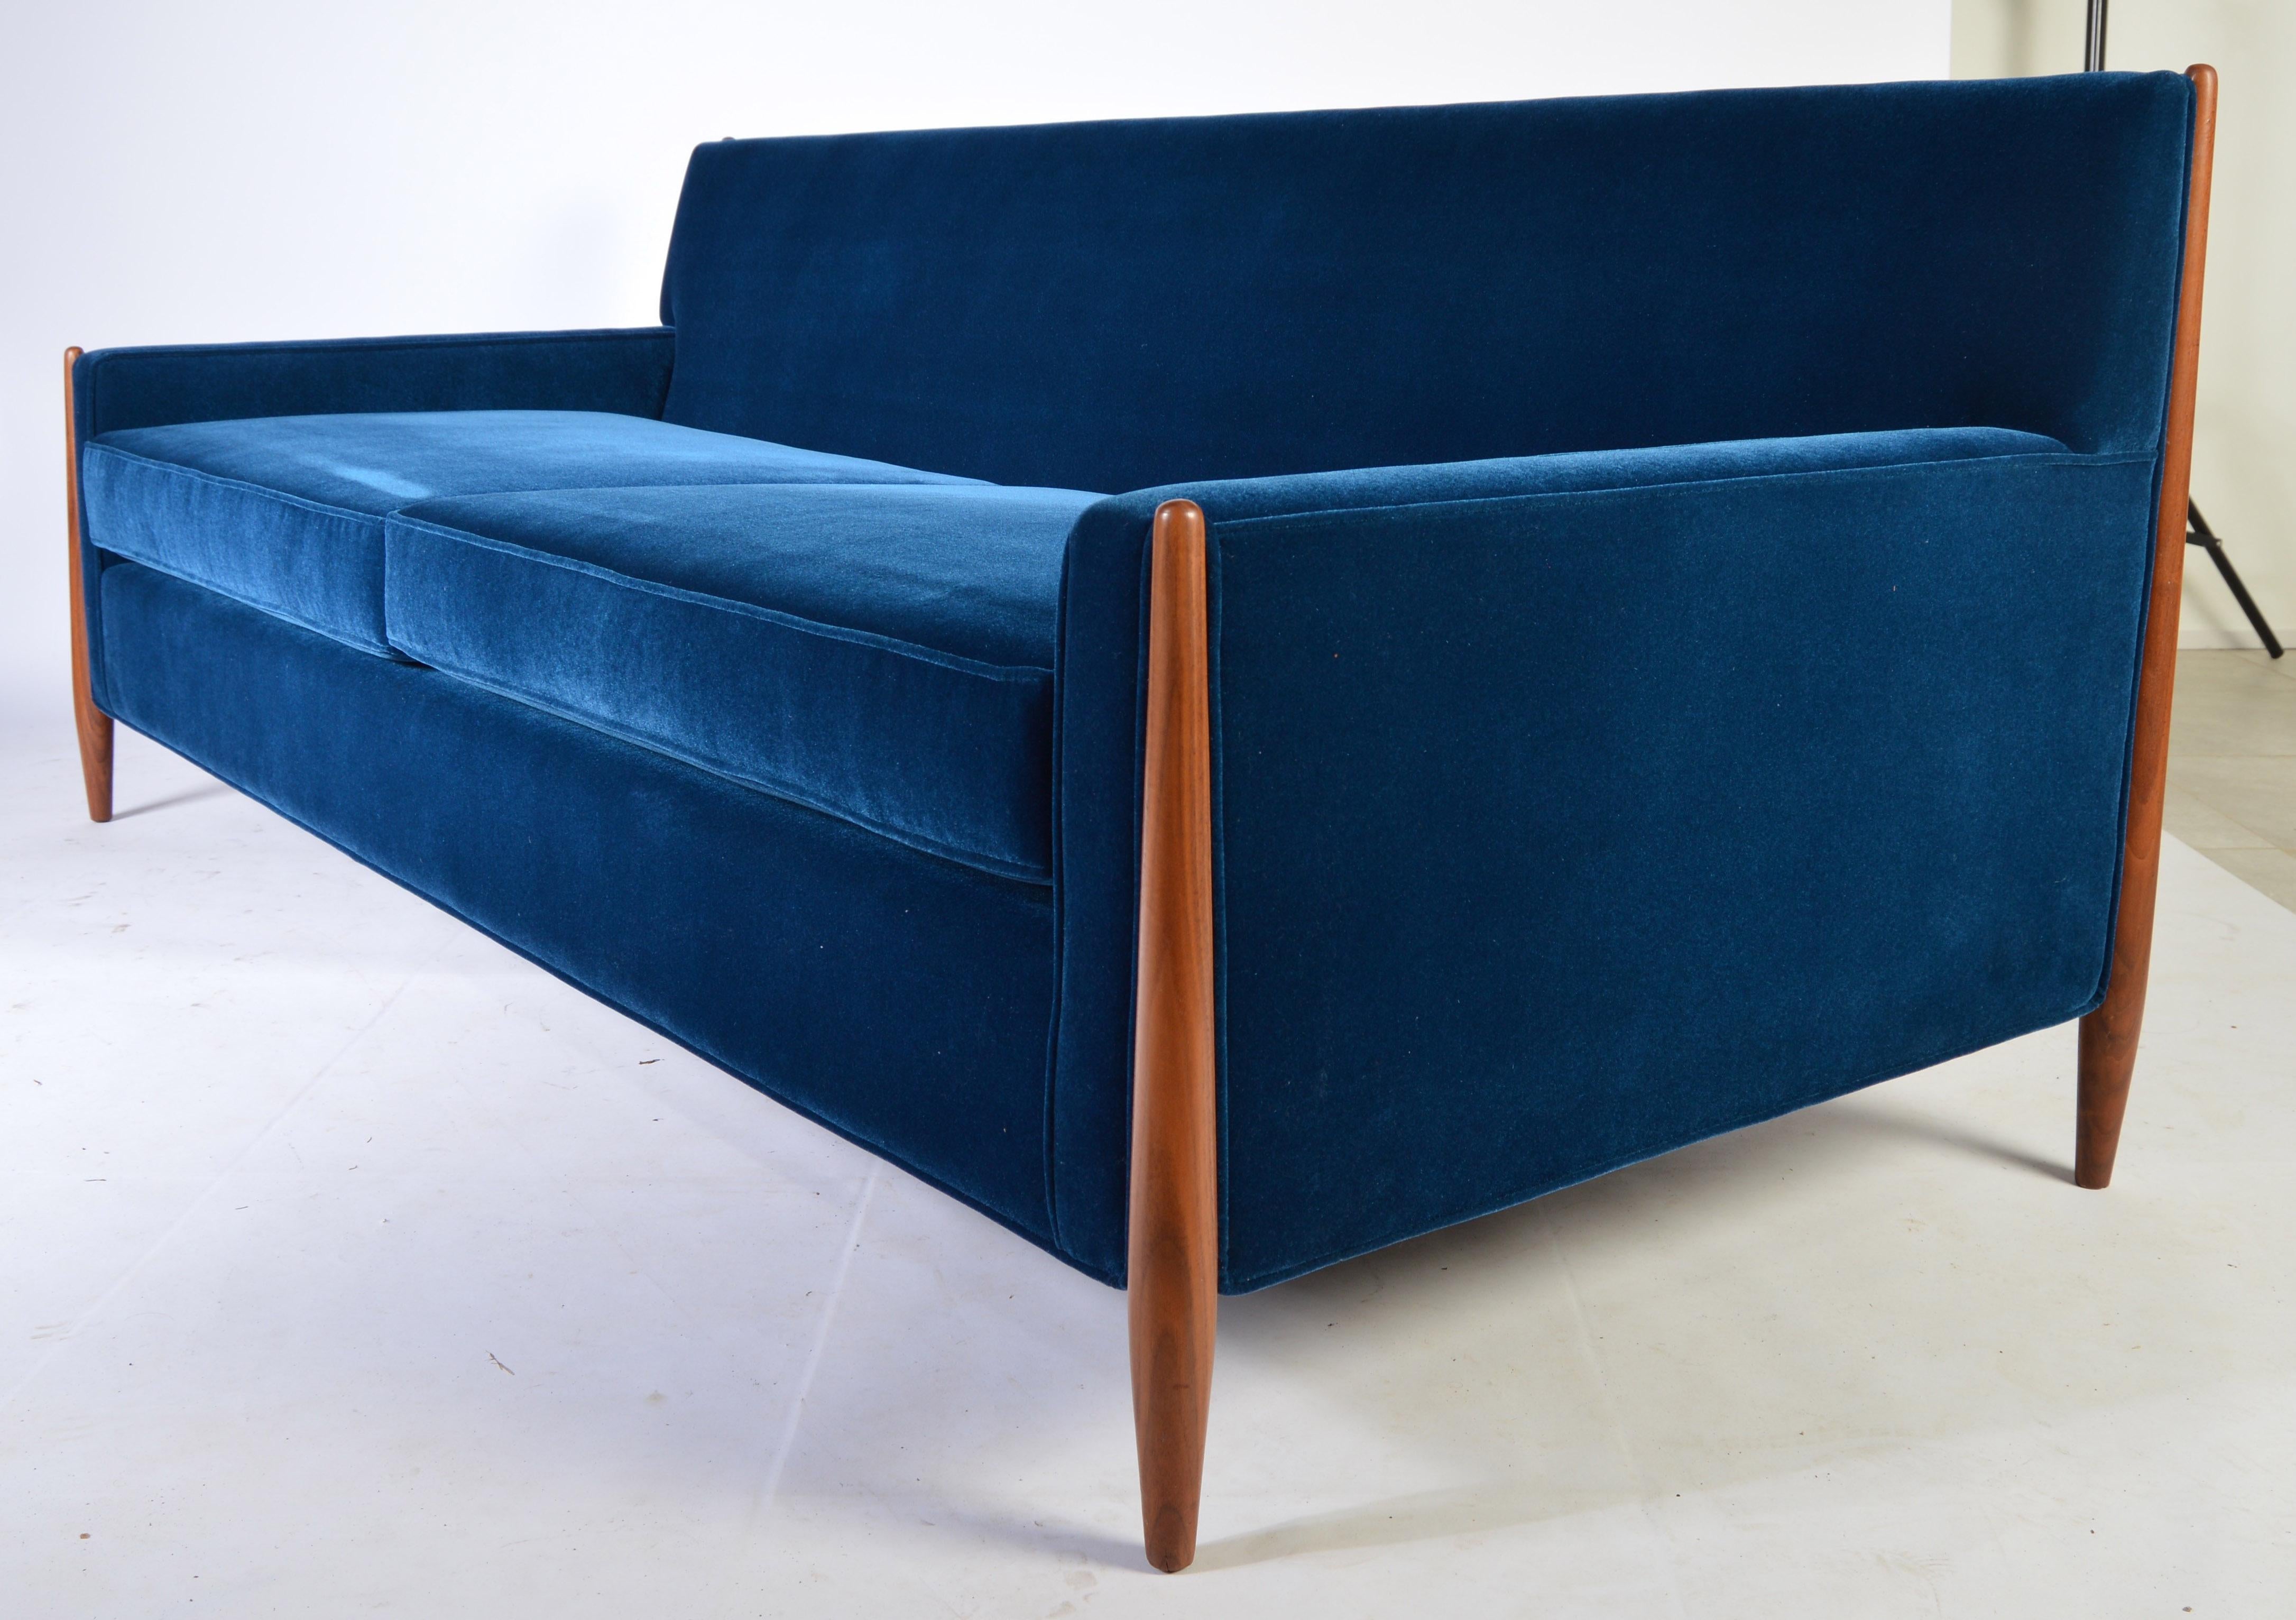 Very comfortable sofa designed by Jules Heumann for Metropolitan, circa 1960s having sculptural walnut legs and midnight blue Lustrous Velvet upholstery.
Reupholstered with new suspension and cushions.
Phenomenal condition.
Measures: 77.5